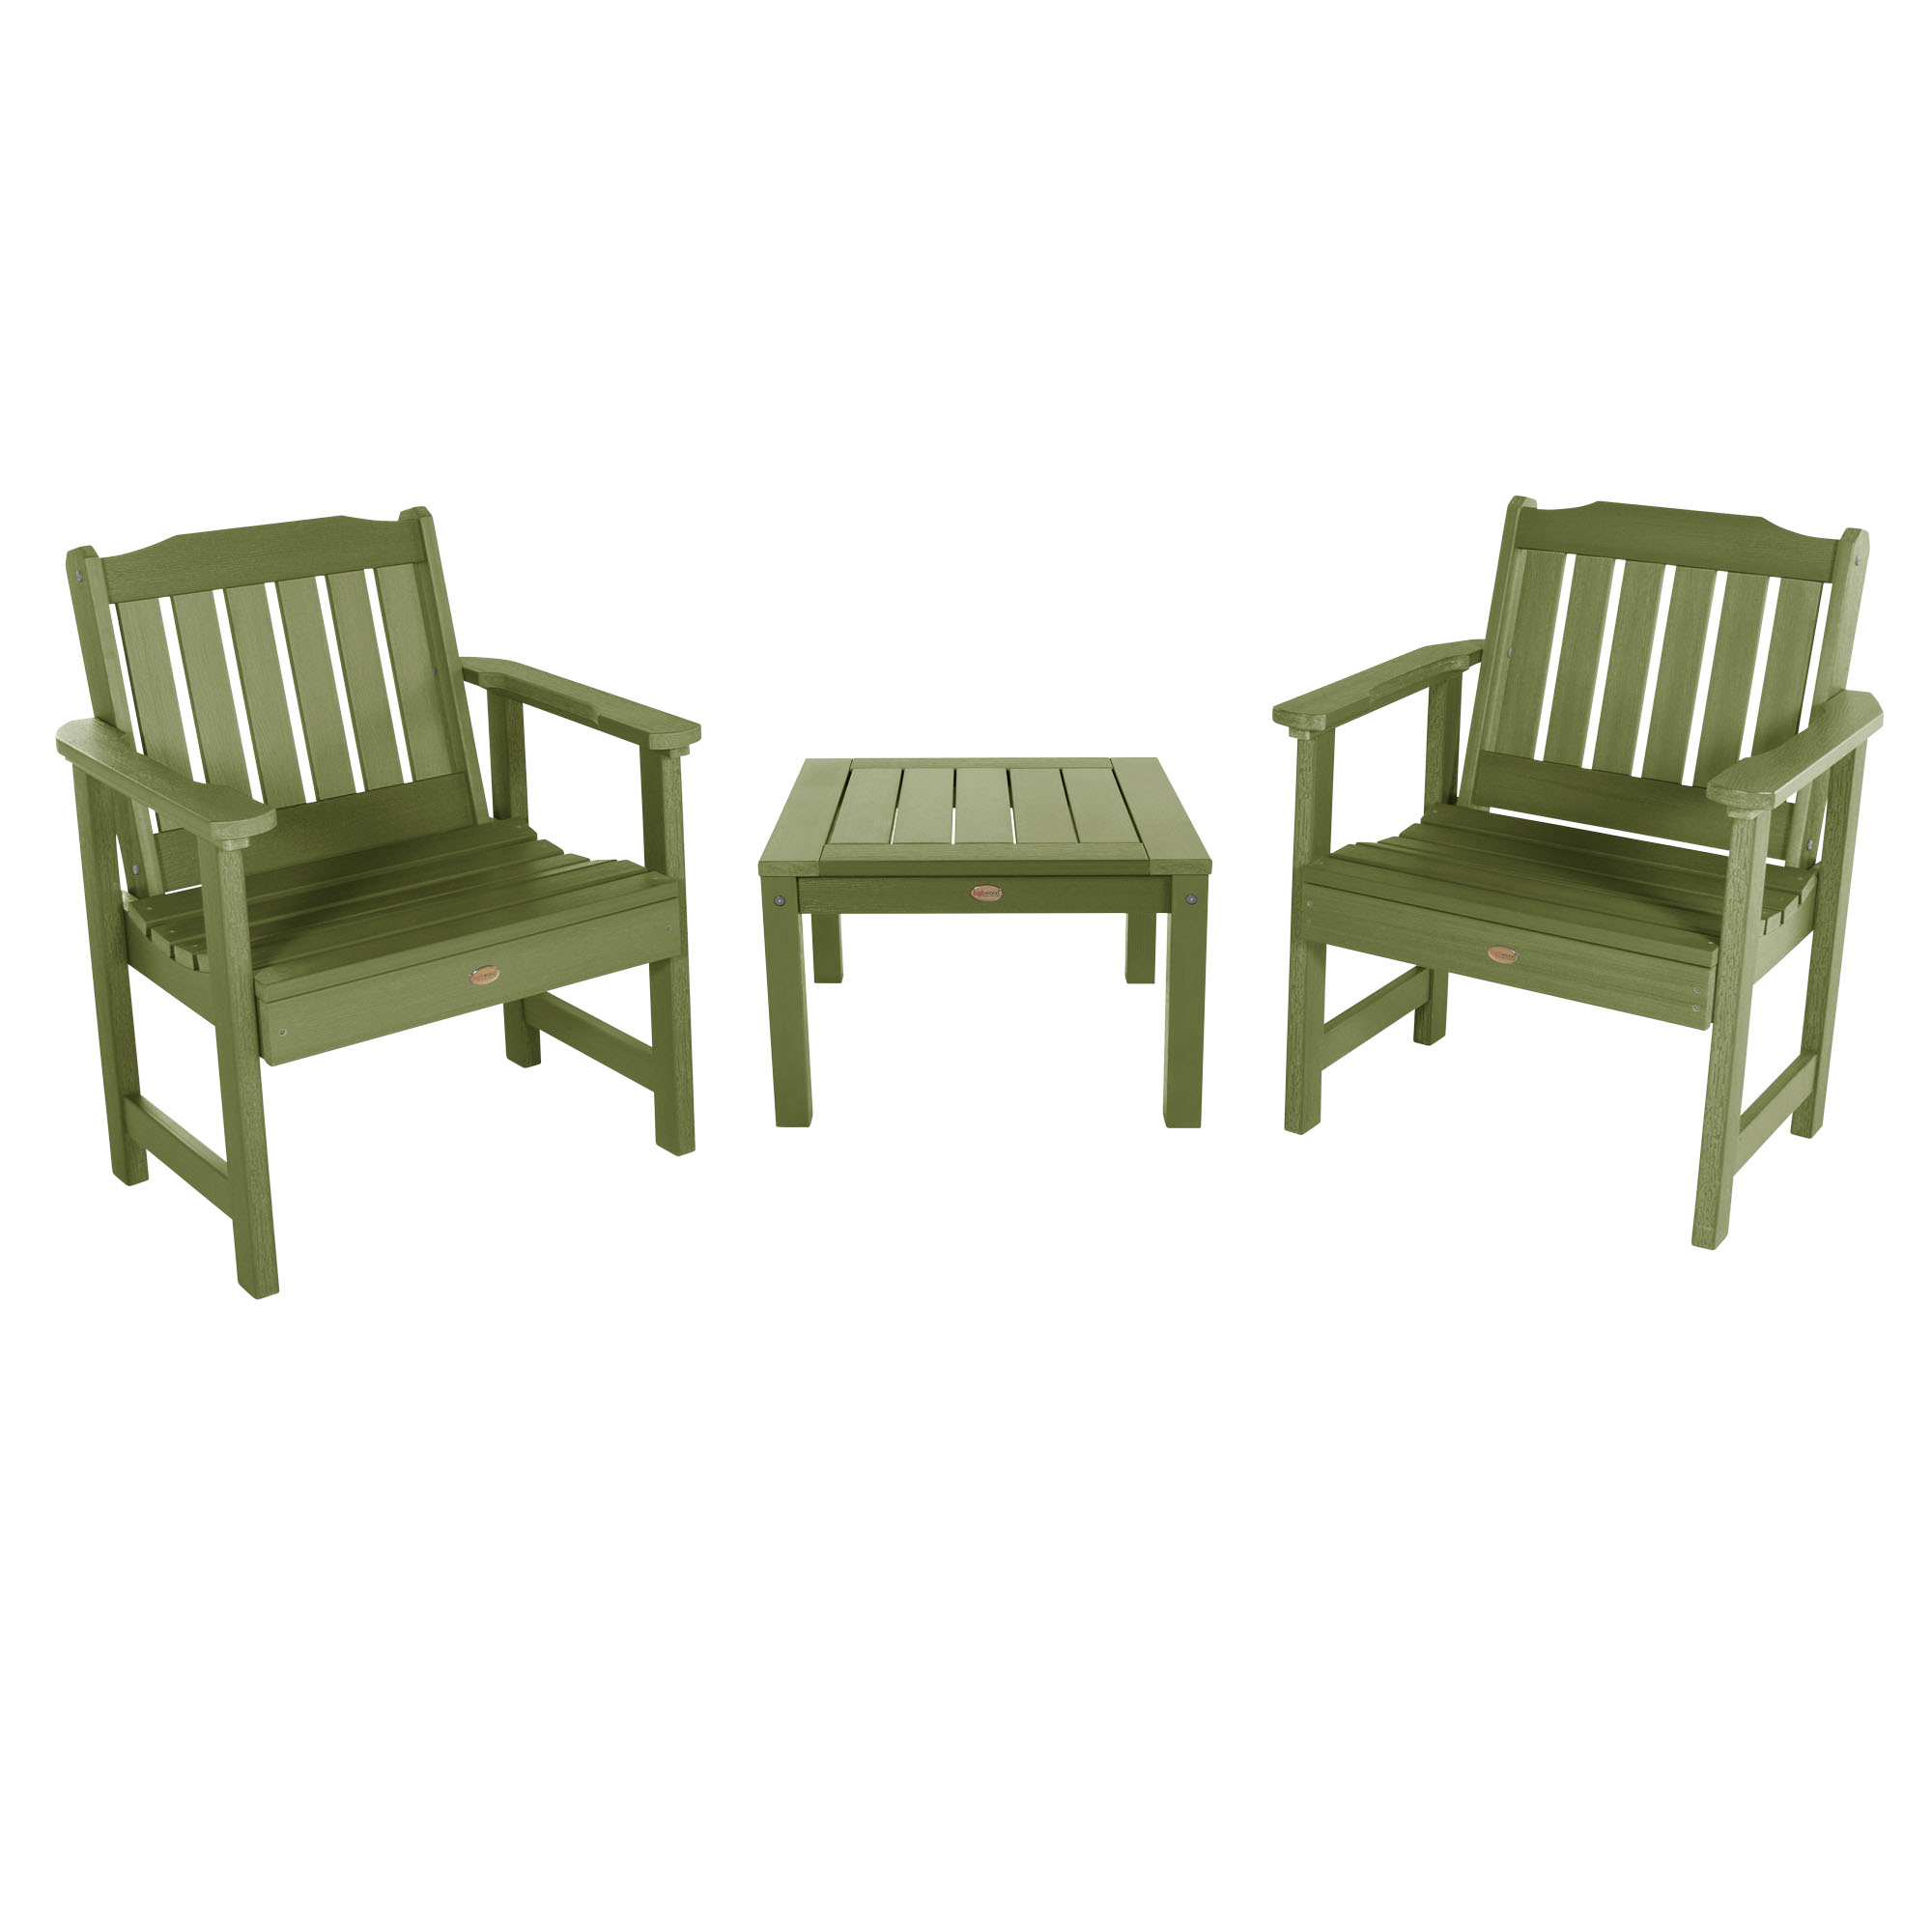 2 Lehigh Garden Chairs with 1 Square Side Table - image 1 of 16